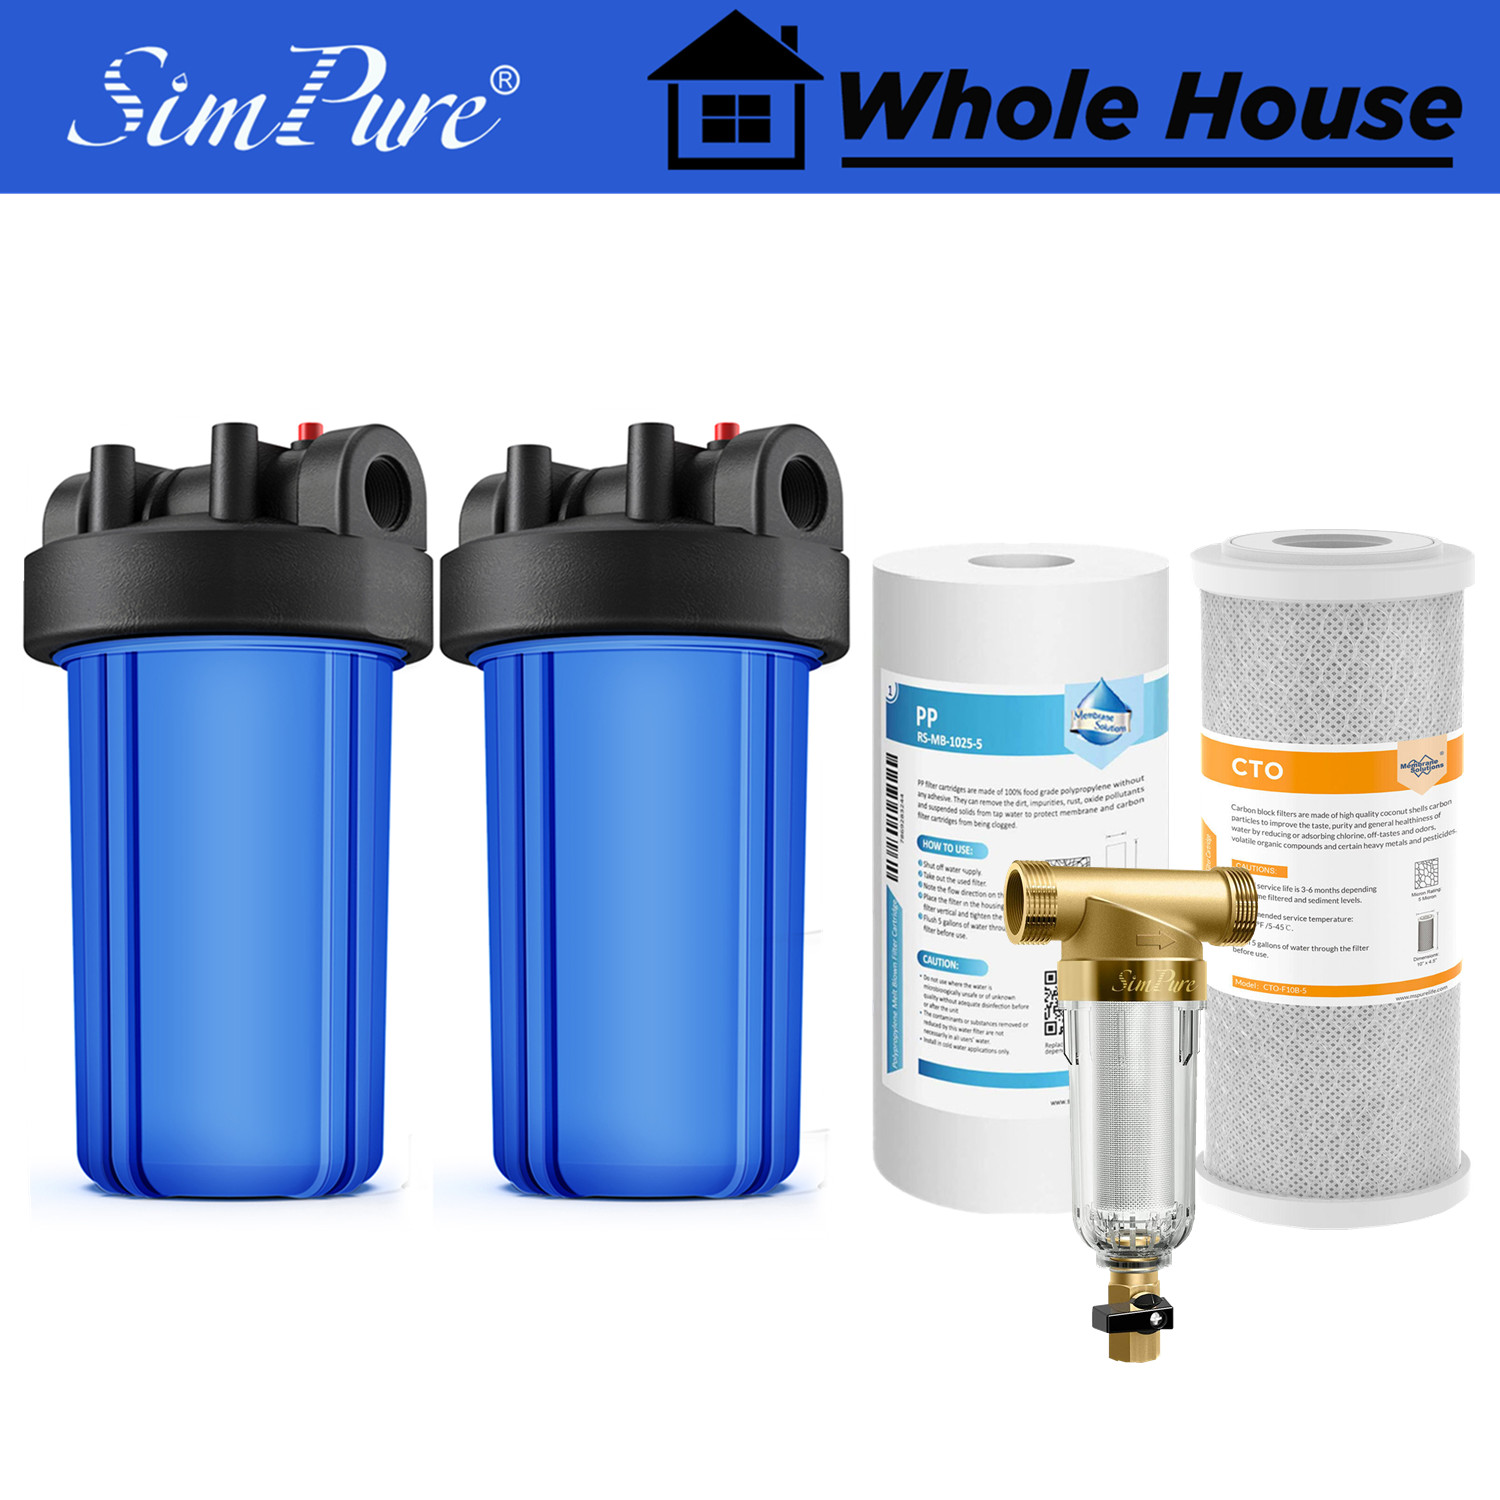 Big Blue 4.5 x 10" Whole House Well Water Filter Housings with Pressure Release 